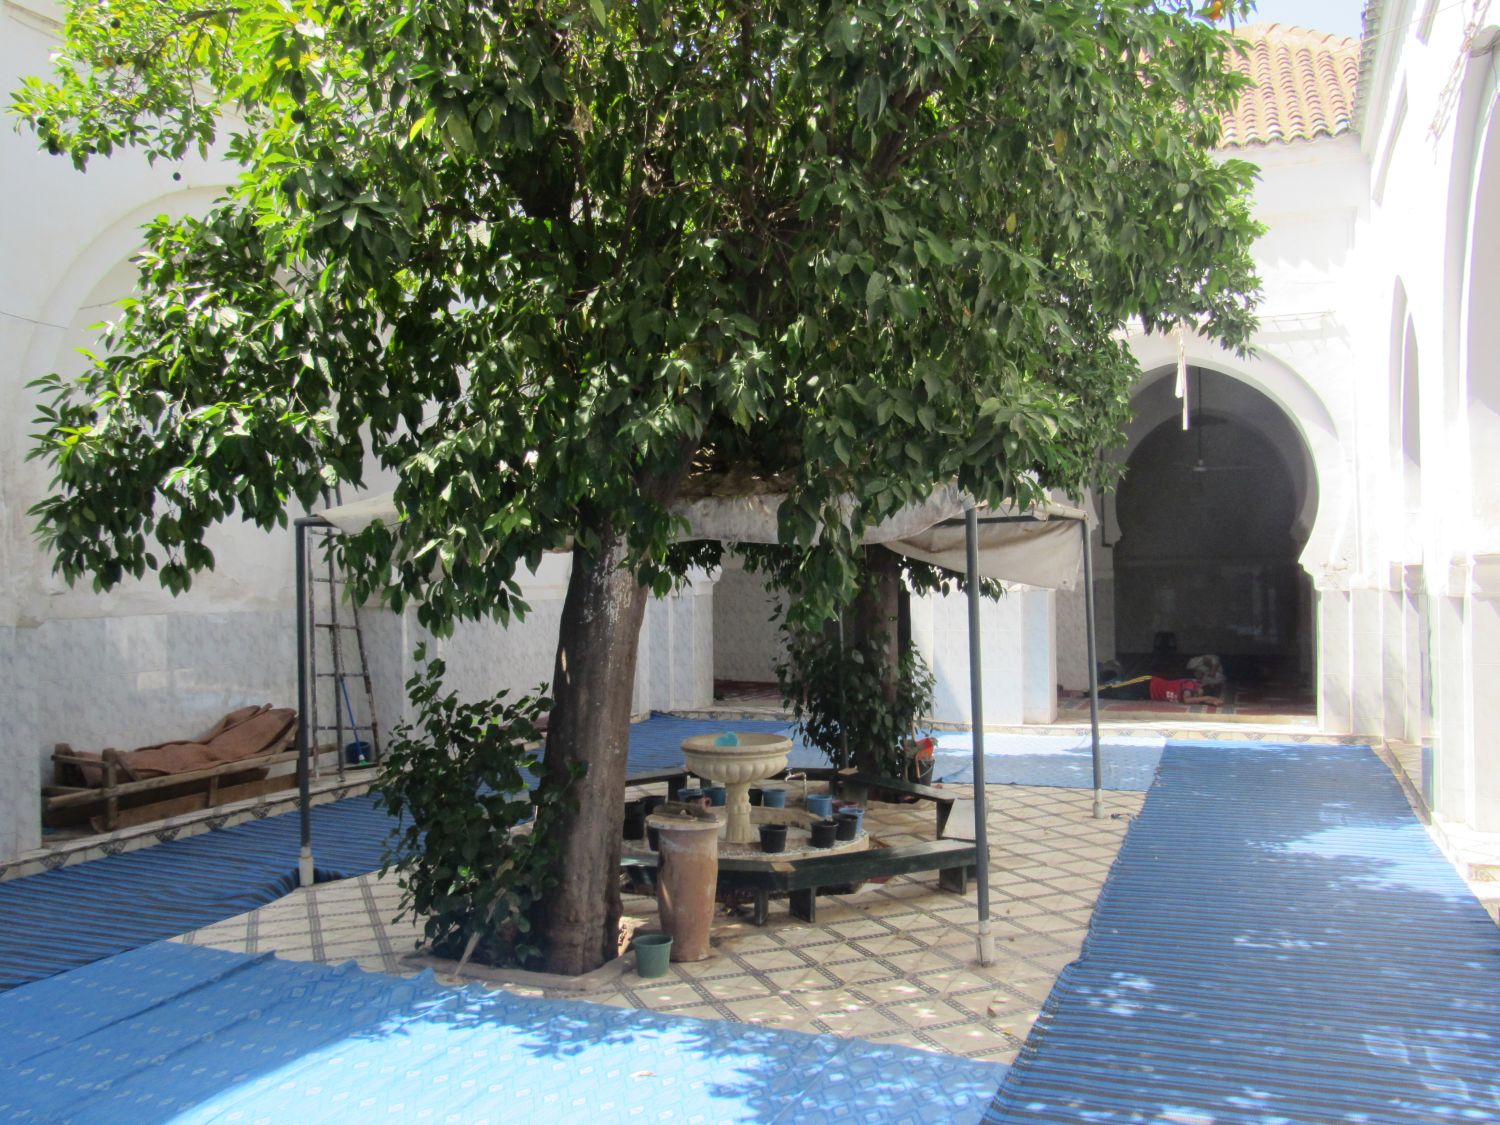 View of the courtyard with a citrus tree and fountain